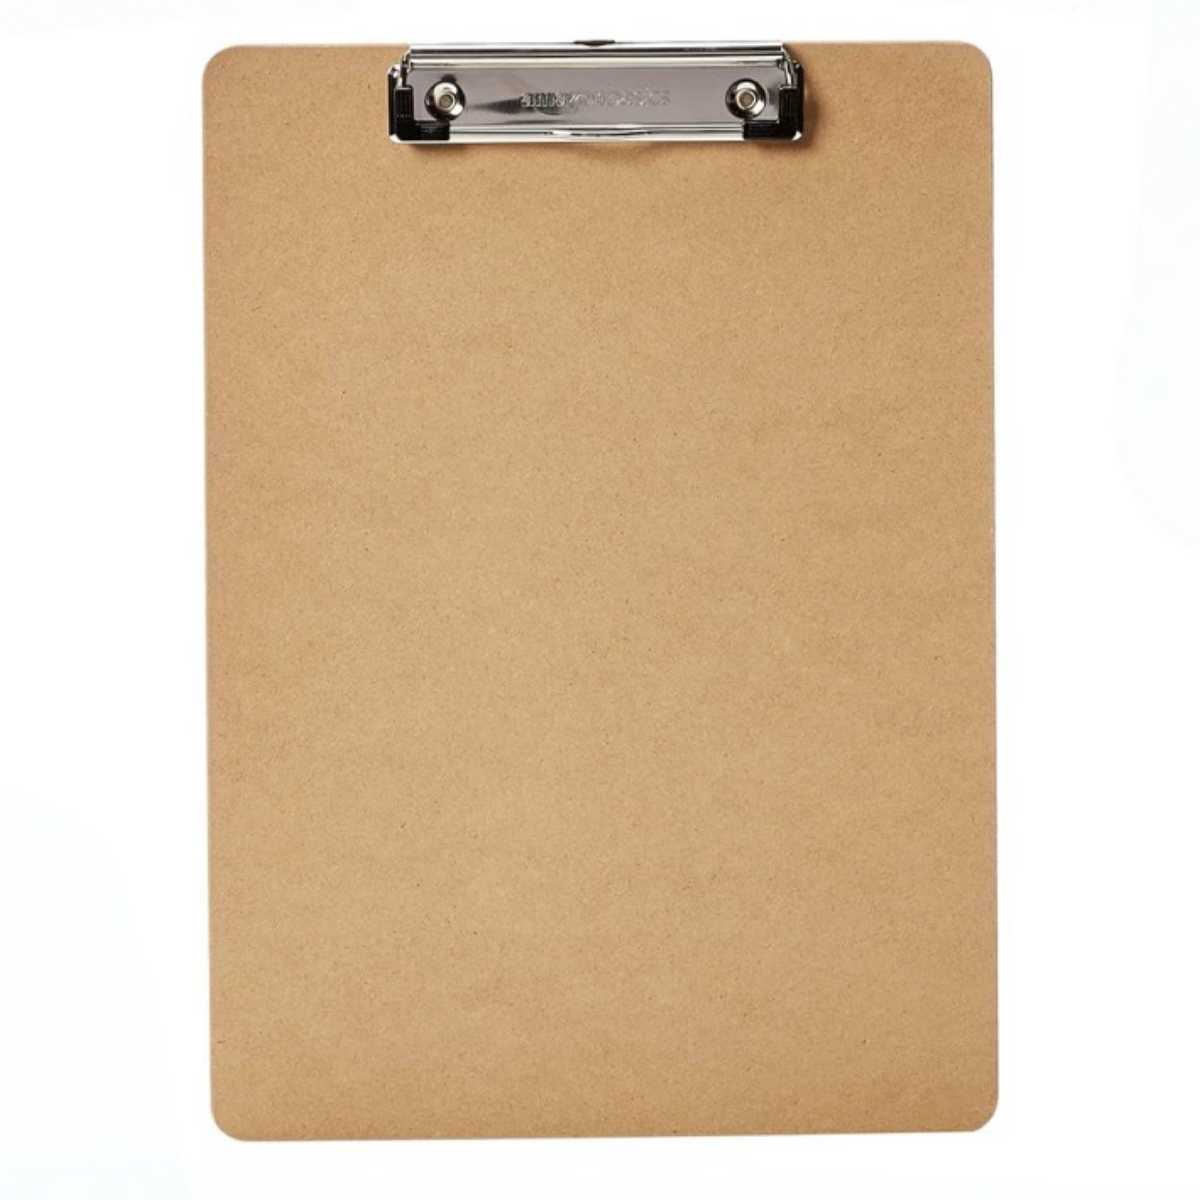 Letter Sized 12.5"x 9" Recycled Wood Clipboard - Low Profile Clip For Easy Stacking!